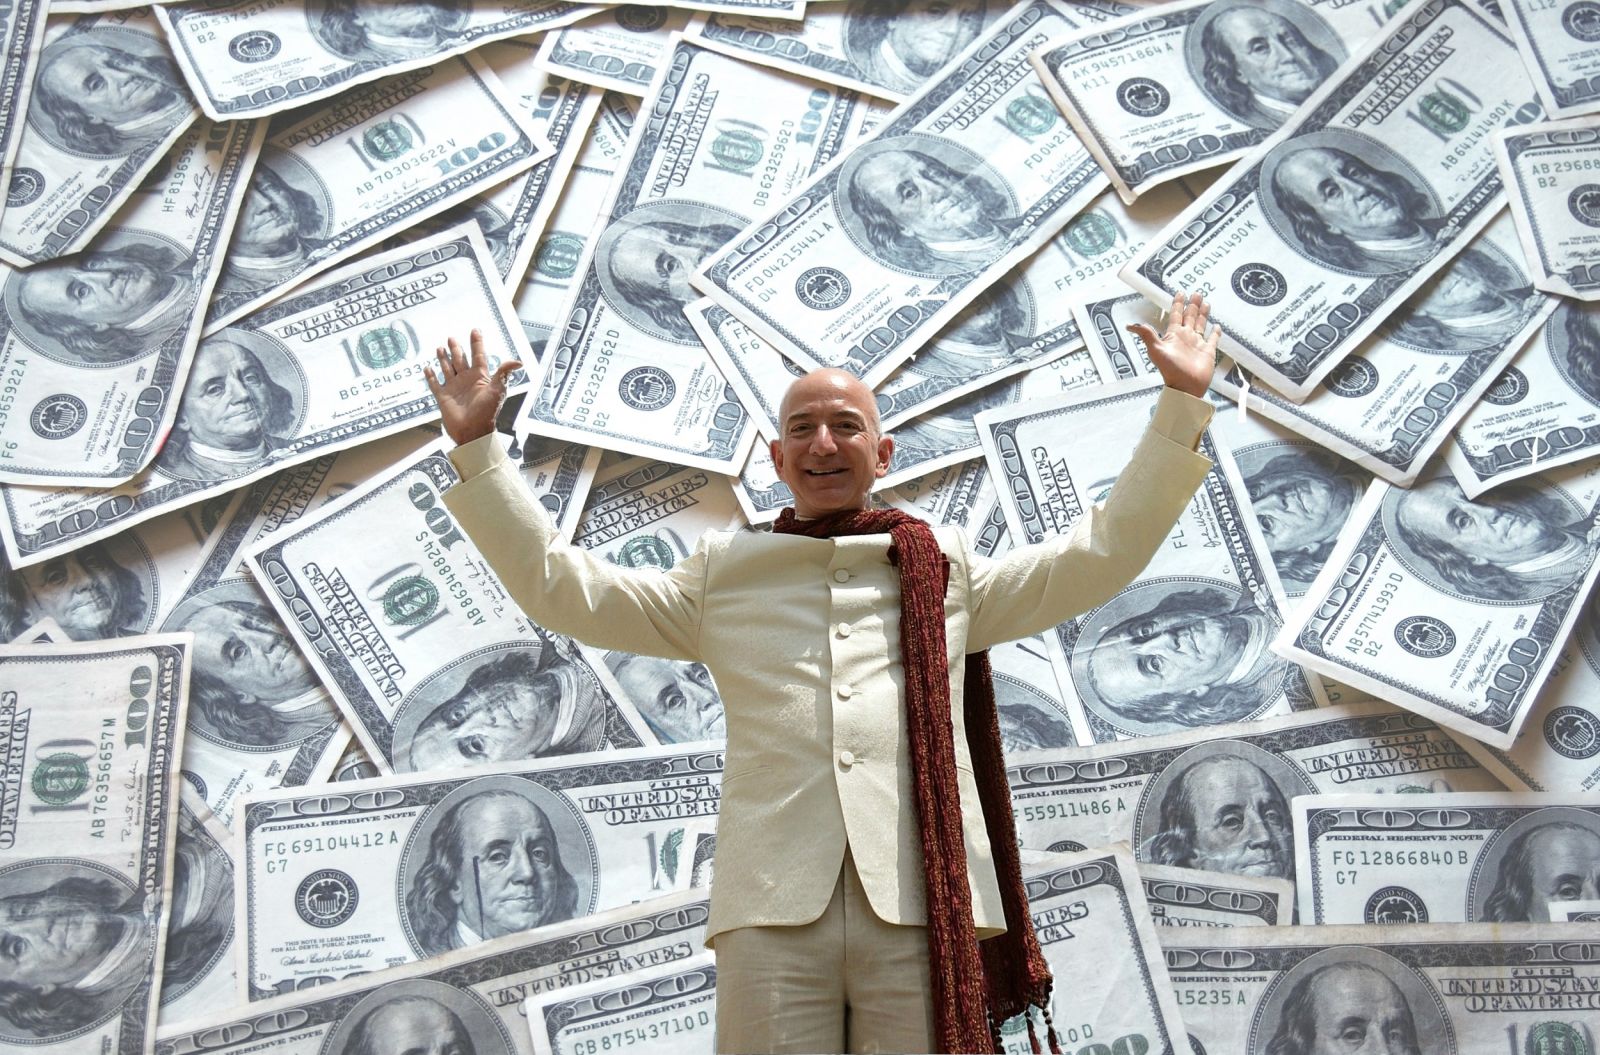 Illustration for article titled Amazon boss Jeff Bezos adds $24bn to fortune